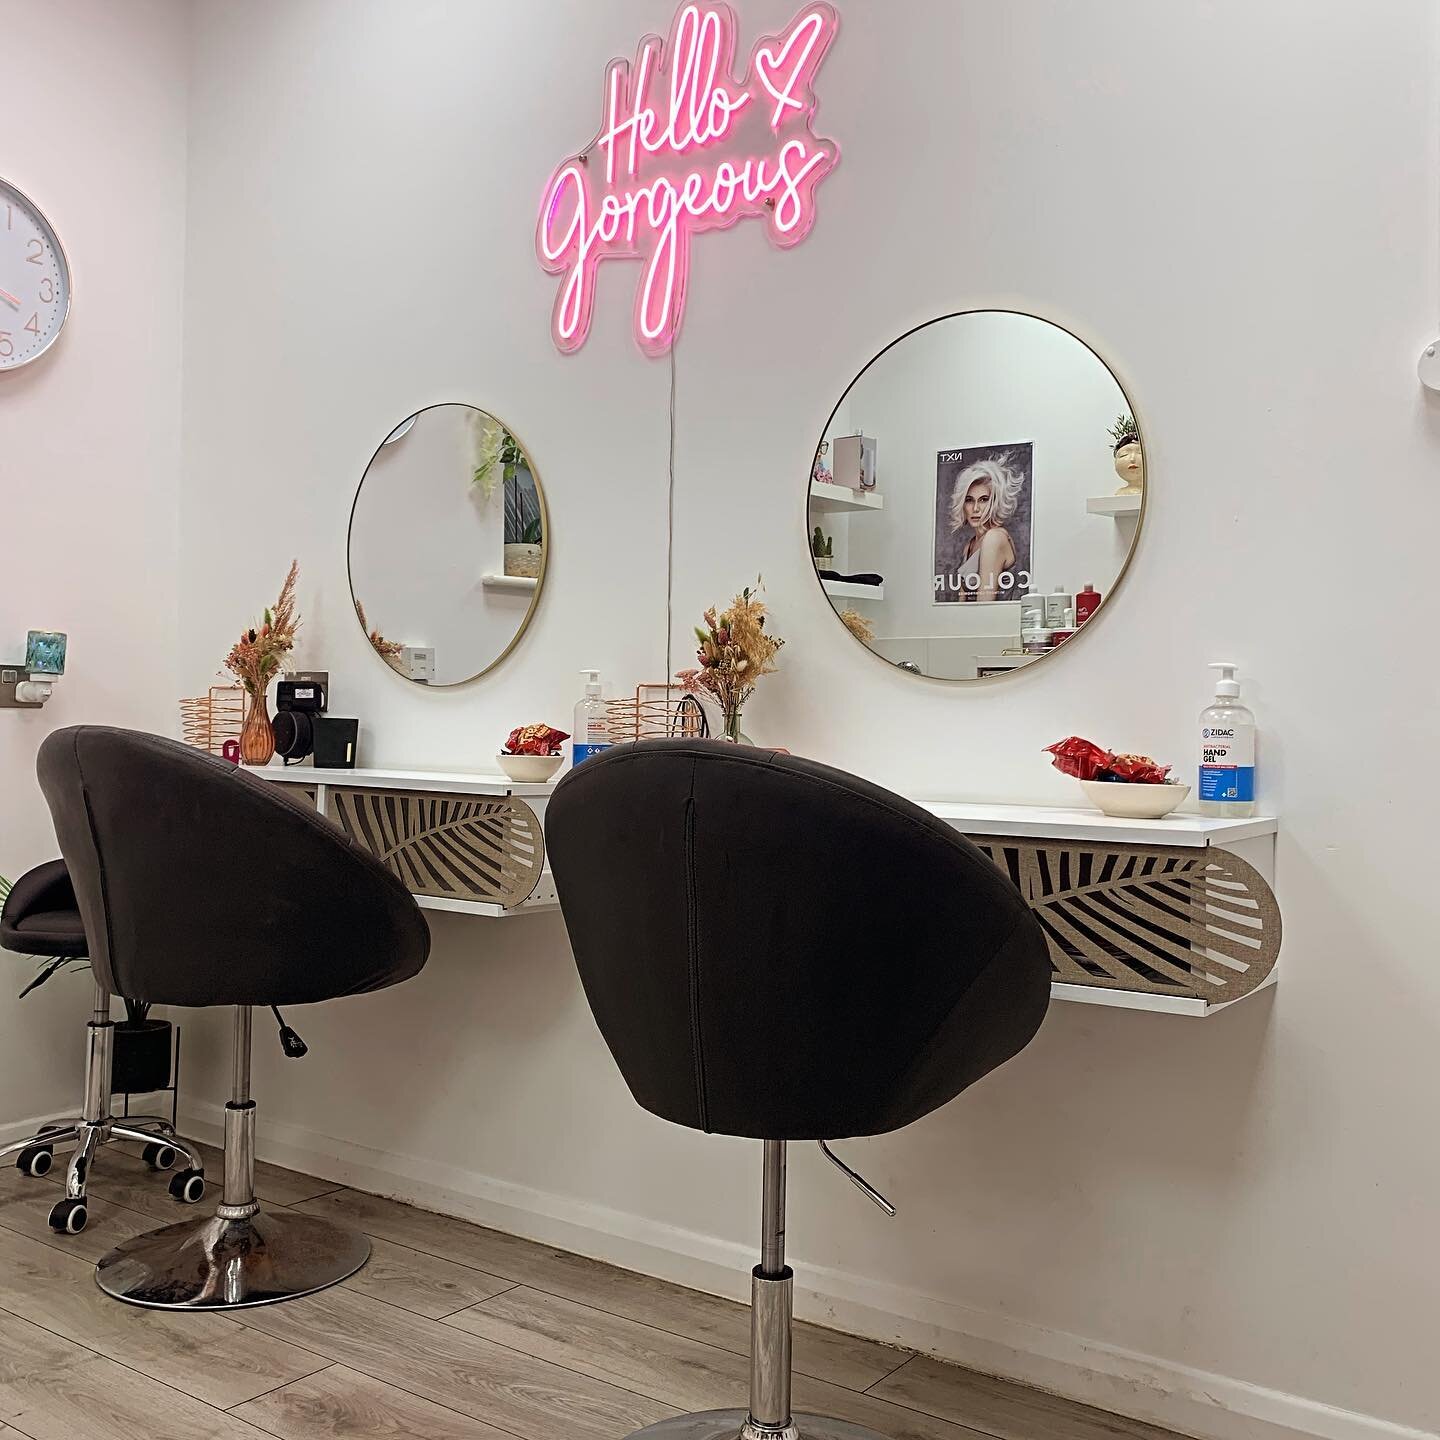 Hello Gorgeous!
Appointments available this Thursday, click on the book now button and enjoy a quiet moment in the new studio salon 
.
.
.
#wellaprofessional #blondespecialist #brunette #copperhair #studiosalon #hairstylist 
#chandlersfordsalon #chan